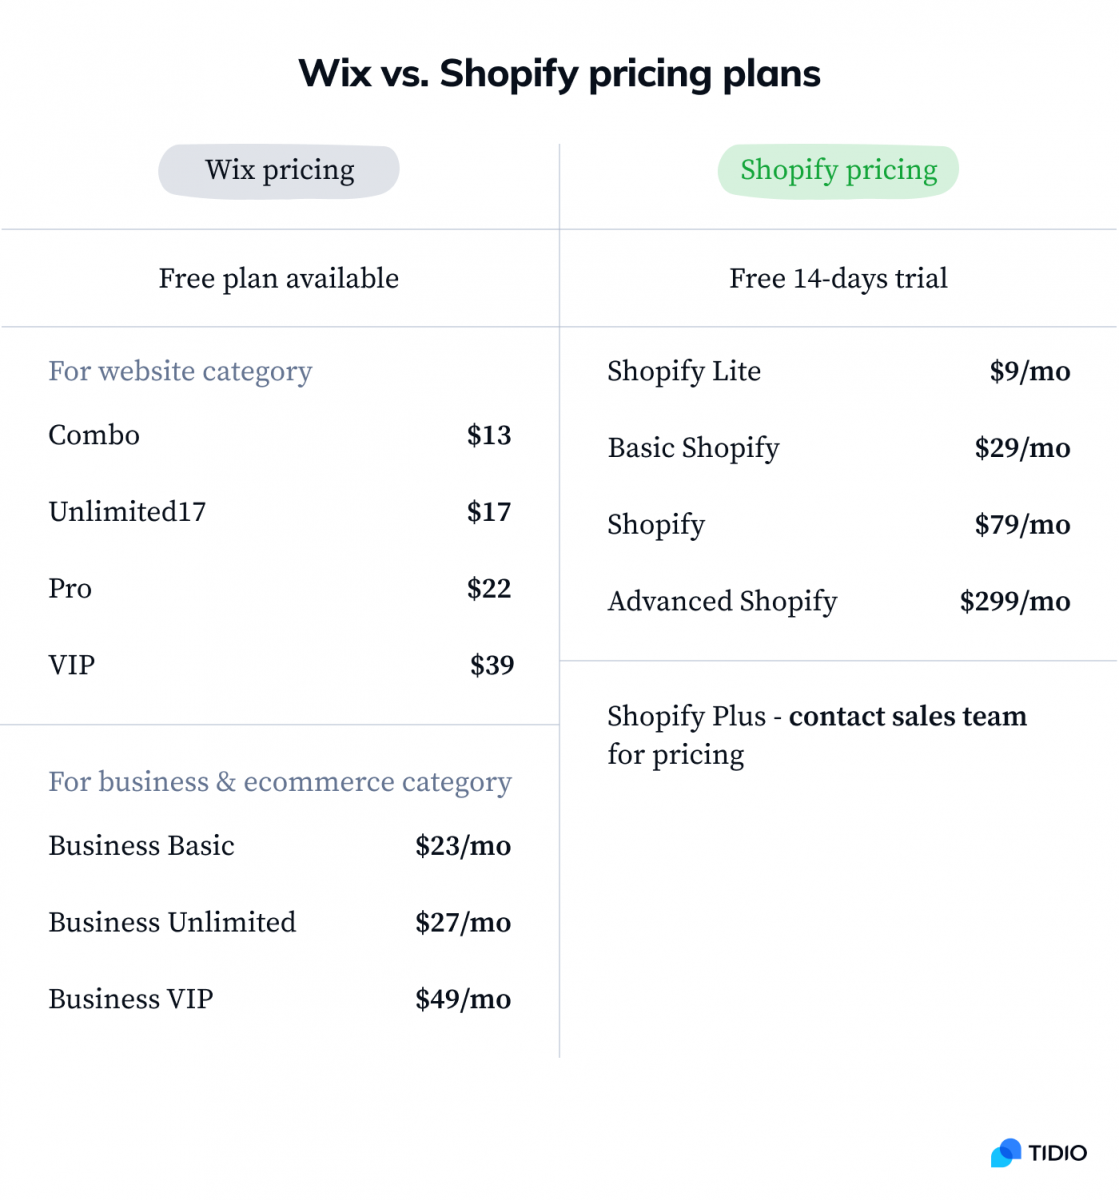 Wix vs. Shopify pricing plans table